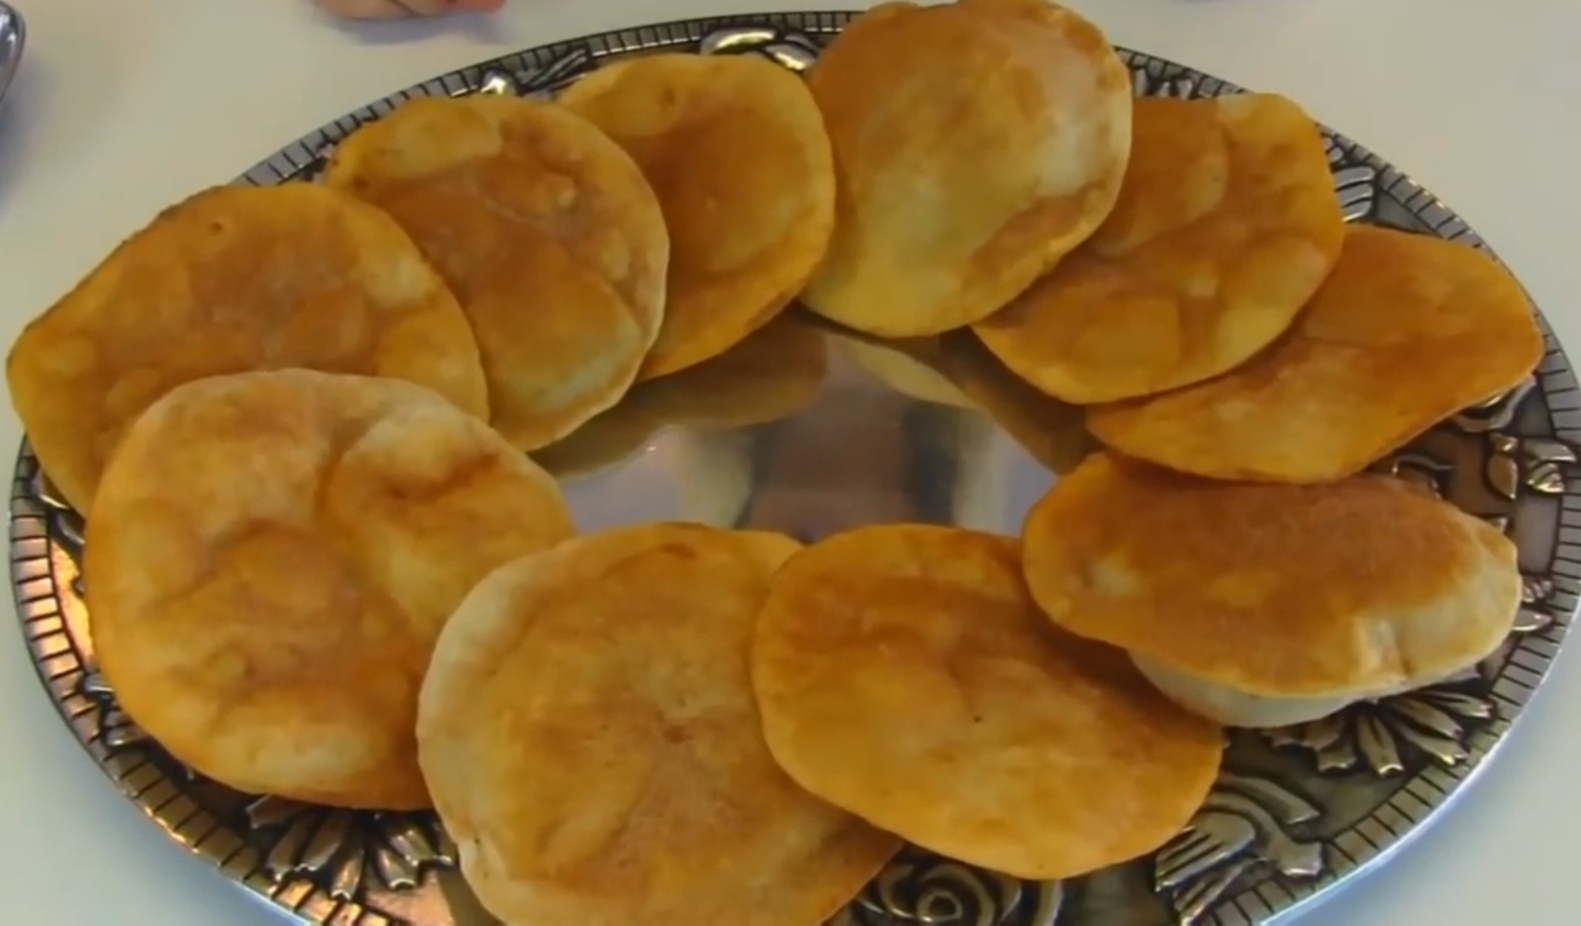 How to Make Elephant Ears With Tortillas? 